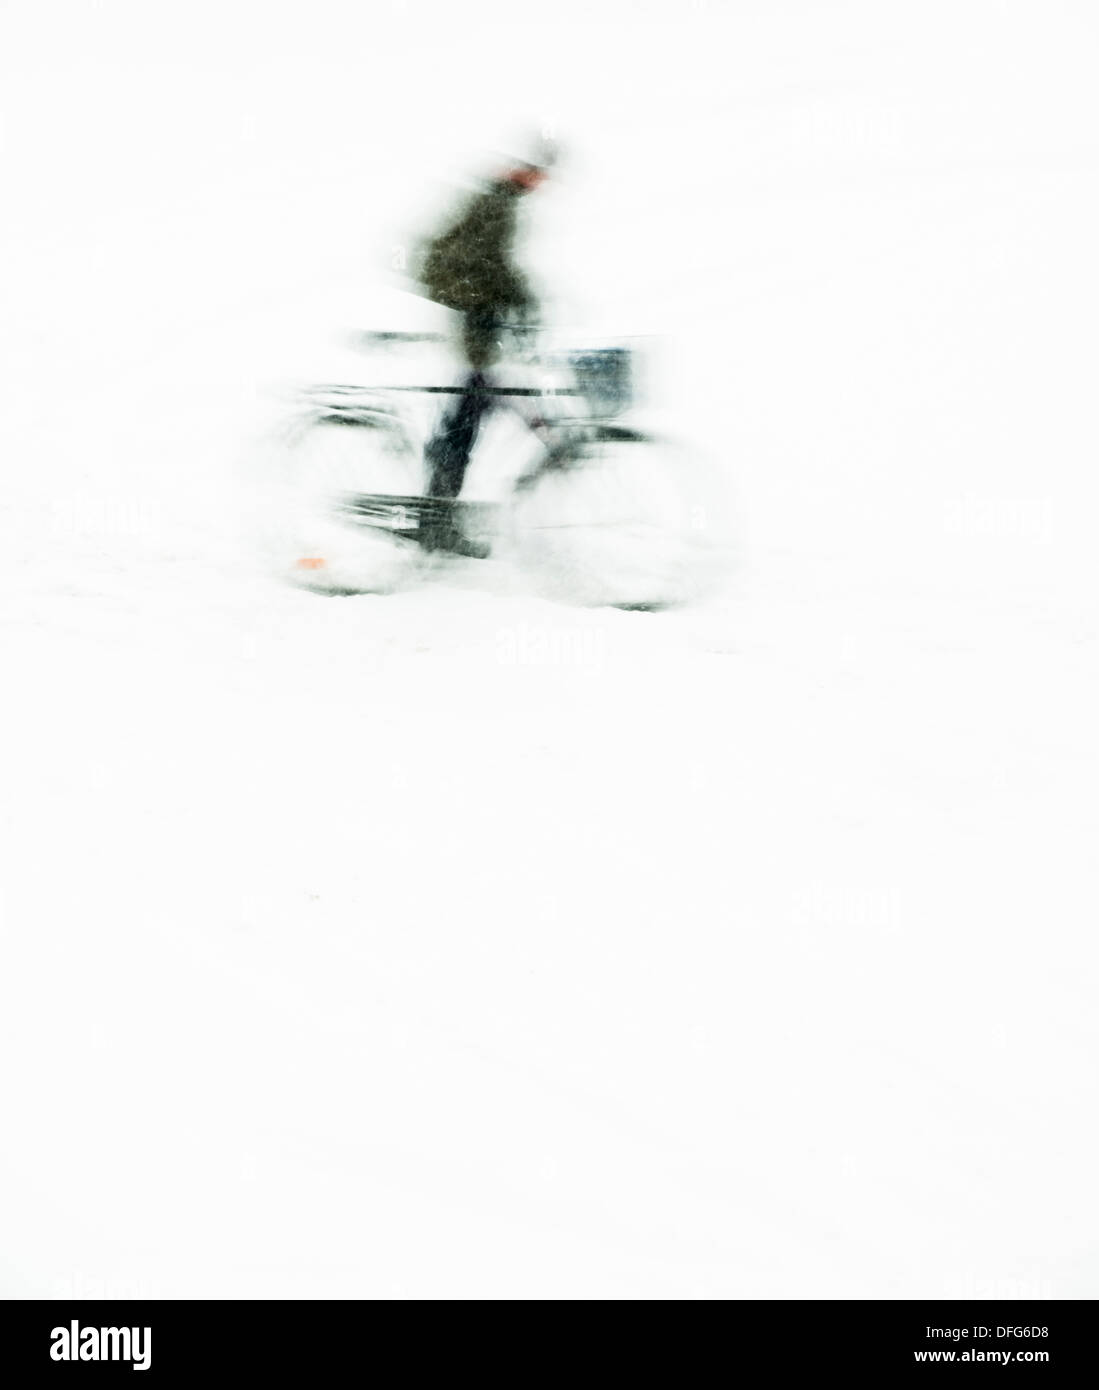 Silhouette with blurred motion of man riding a bike in snowfall with  room for copyspace Stock Photo